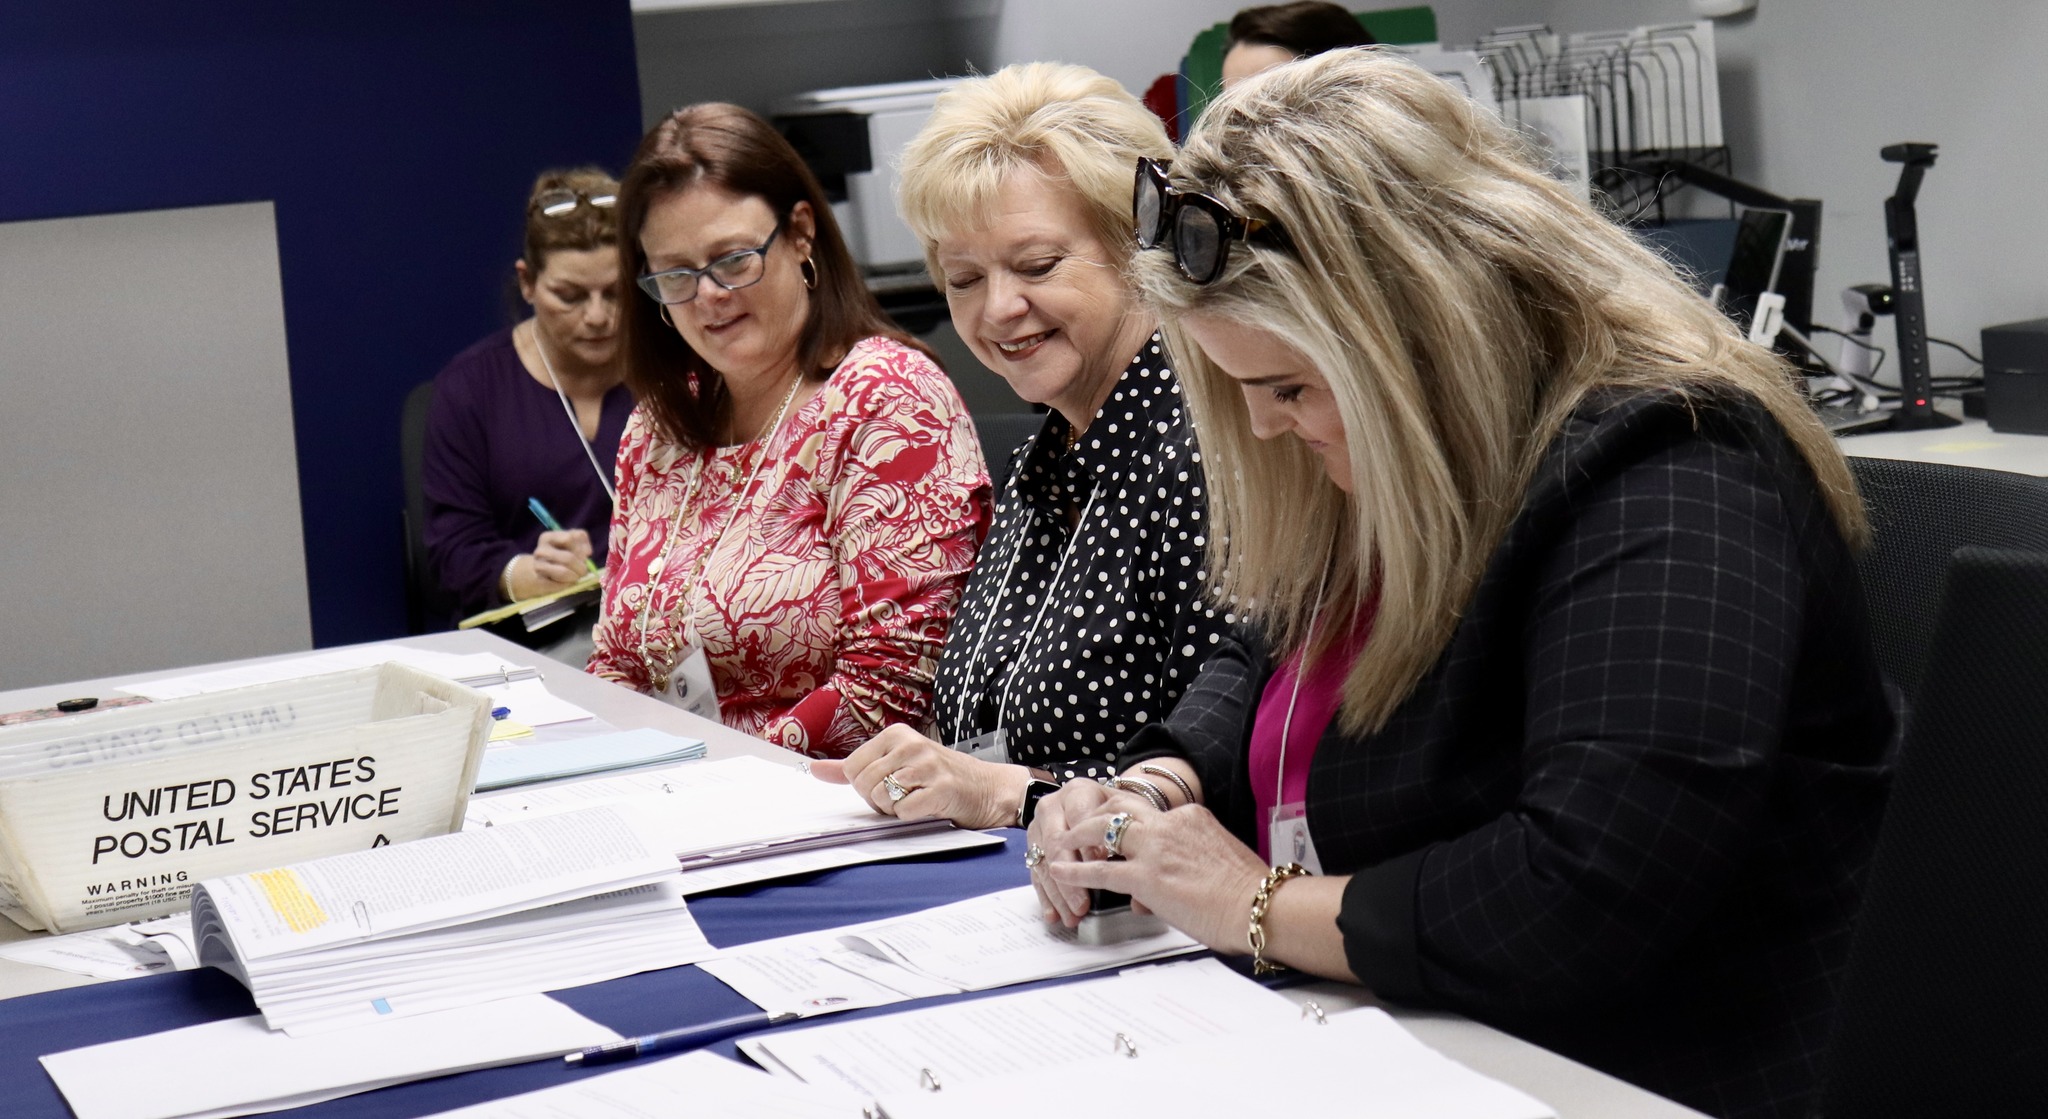 From left, Assistant Supervisor of Elections Maria Pearson, Alternate Canvassing Board member Teresa Prince, Supervisor of Elections Janet Adkins and Judge Jenny Higginbotham, elections staff, election workers and the Nassau County Canvassing Board complete the Logic and Accuracy Test on the voting and audit equipment in preparation for the March 19 Presidential Preference Primary Election. Submitted